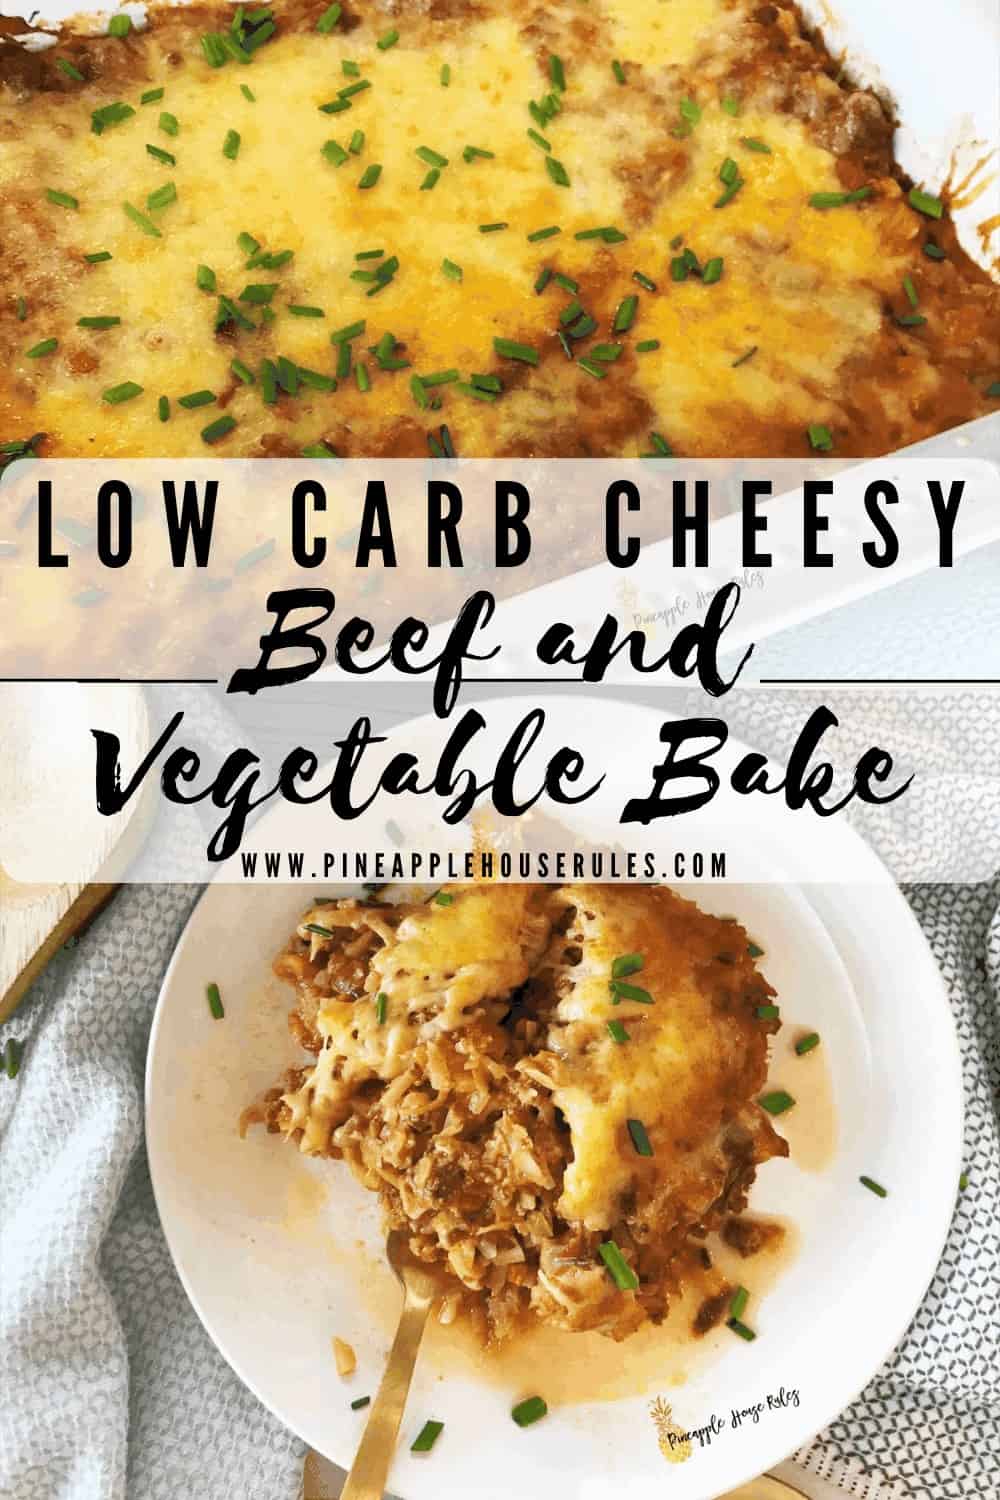 This Low Carb Cheesy Beef and Vegetable Bake is a delicious casserole that's Keto friendly! It's a spin on traditional stuffed cabbage.Deconstructed Stuffed Cabbage | Low Carb | Low Carb Recipes | Easy Recipes | Easy Recipes Healthy | Easy Dinner Recipes | Casserole Recipes | Casserole Recipes for Dinner | Casseroles with Ground Beef | Casserole Recipes for Dinner Healthy | Keto Recipes | Easy Dinner Recipes | Easy Recipes for Dinner | Low Carb Dinner Recipes | Dinner Recipes